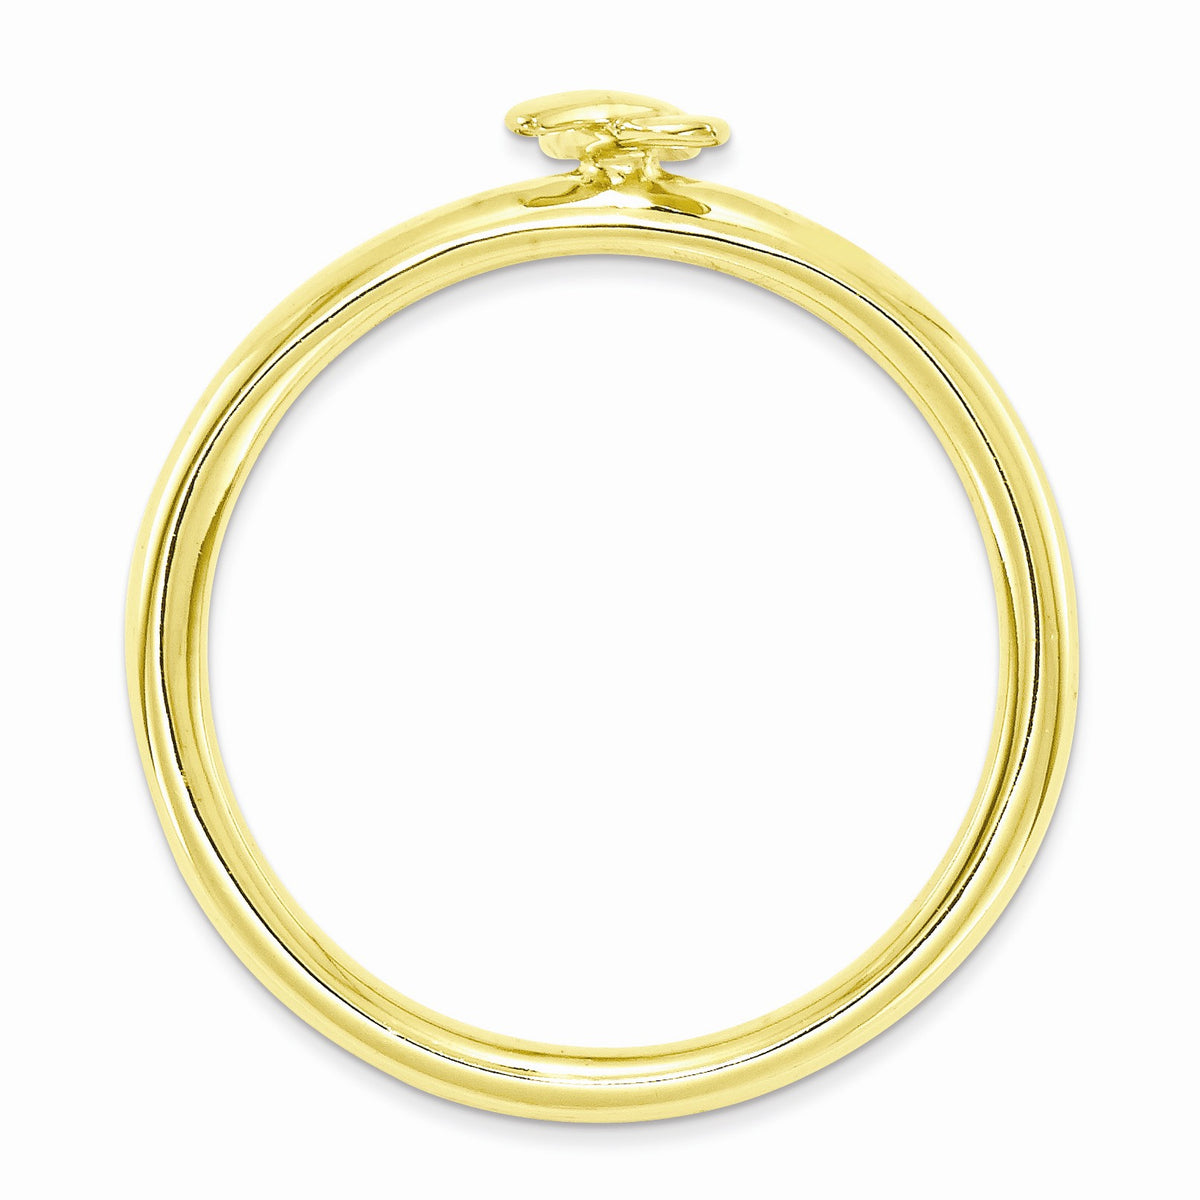 Alternate view of the 2.5mm Stackable 14K Yellow Gold Plated Silver Awareness Ribbon Ring by The Black Bow Jewelry Co.